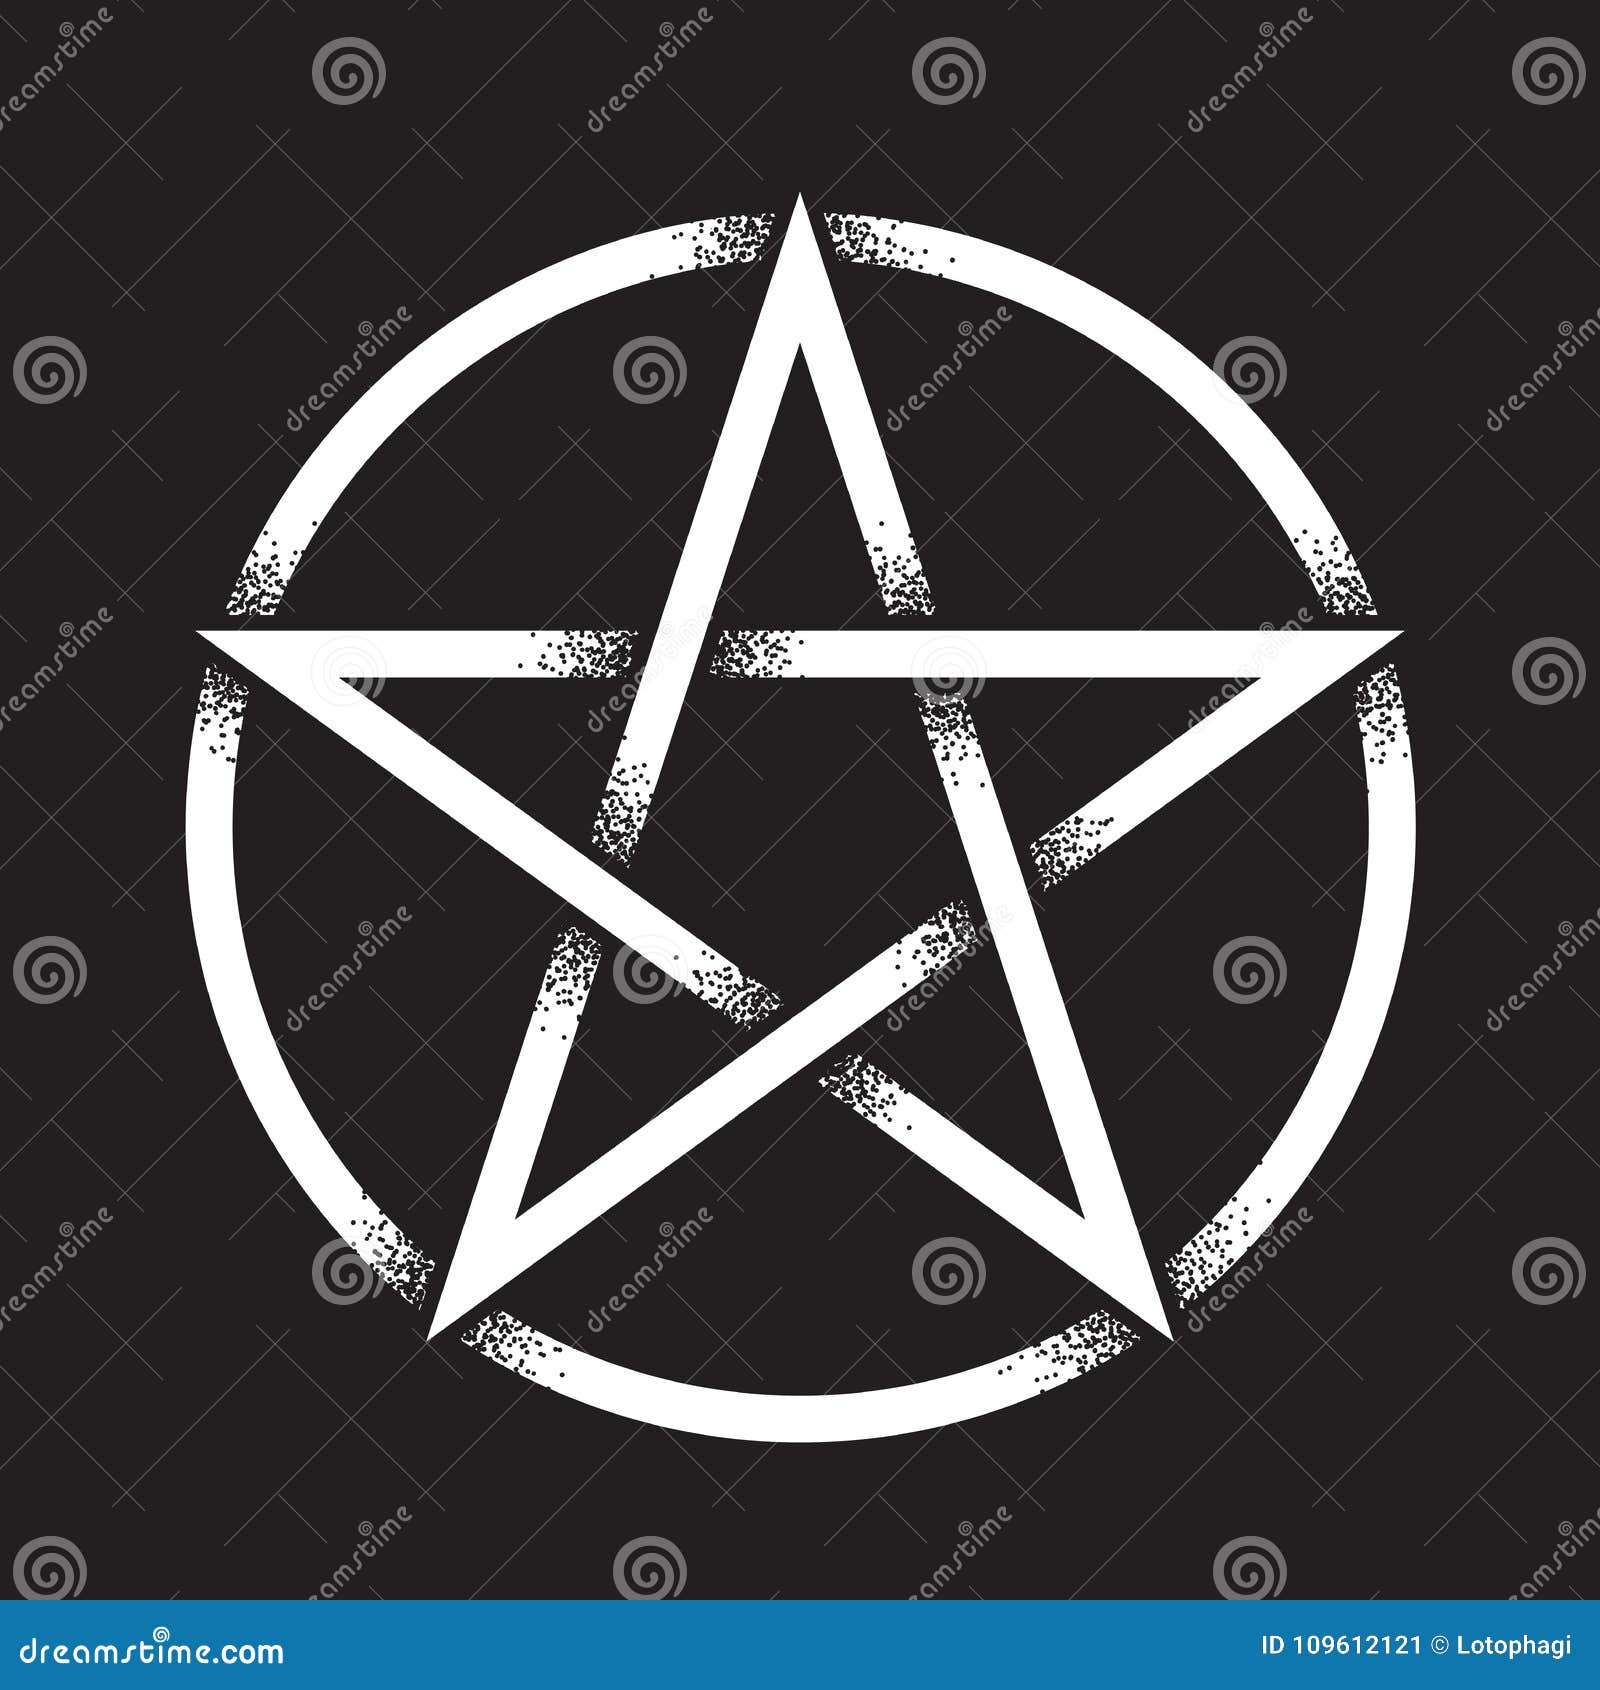 pentagram or pentalpha or pentangle. hand drawn dot work ancient pagan  of five-pointed star   